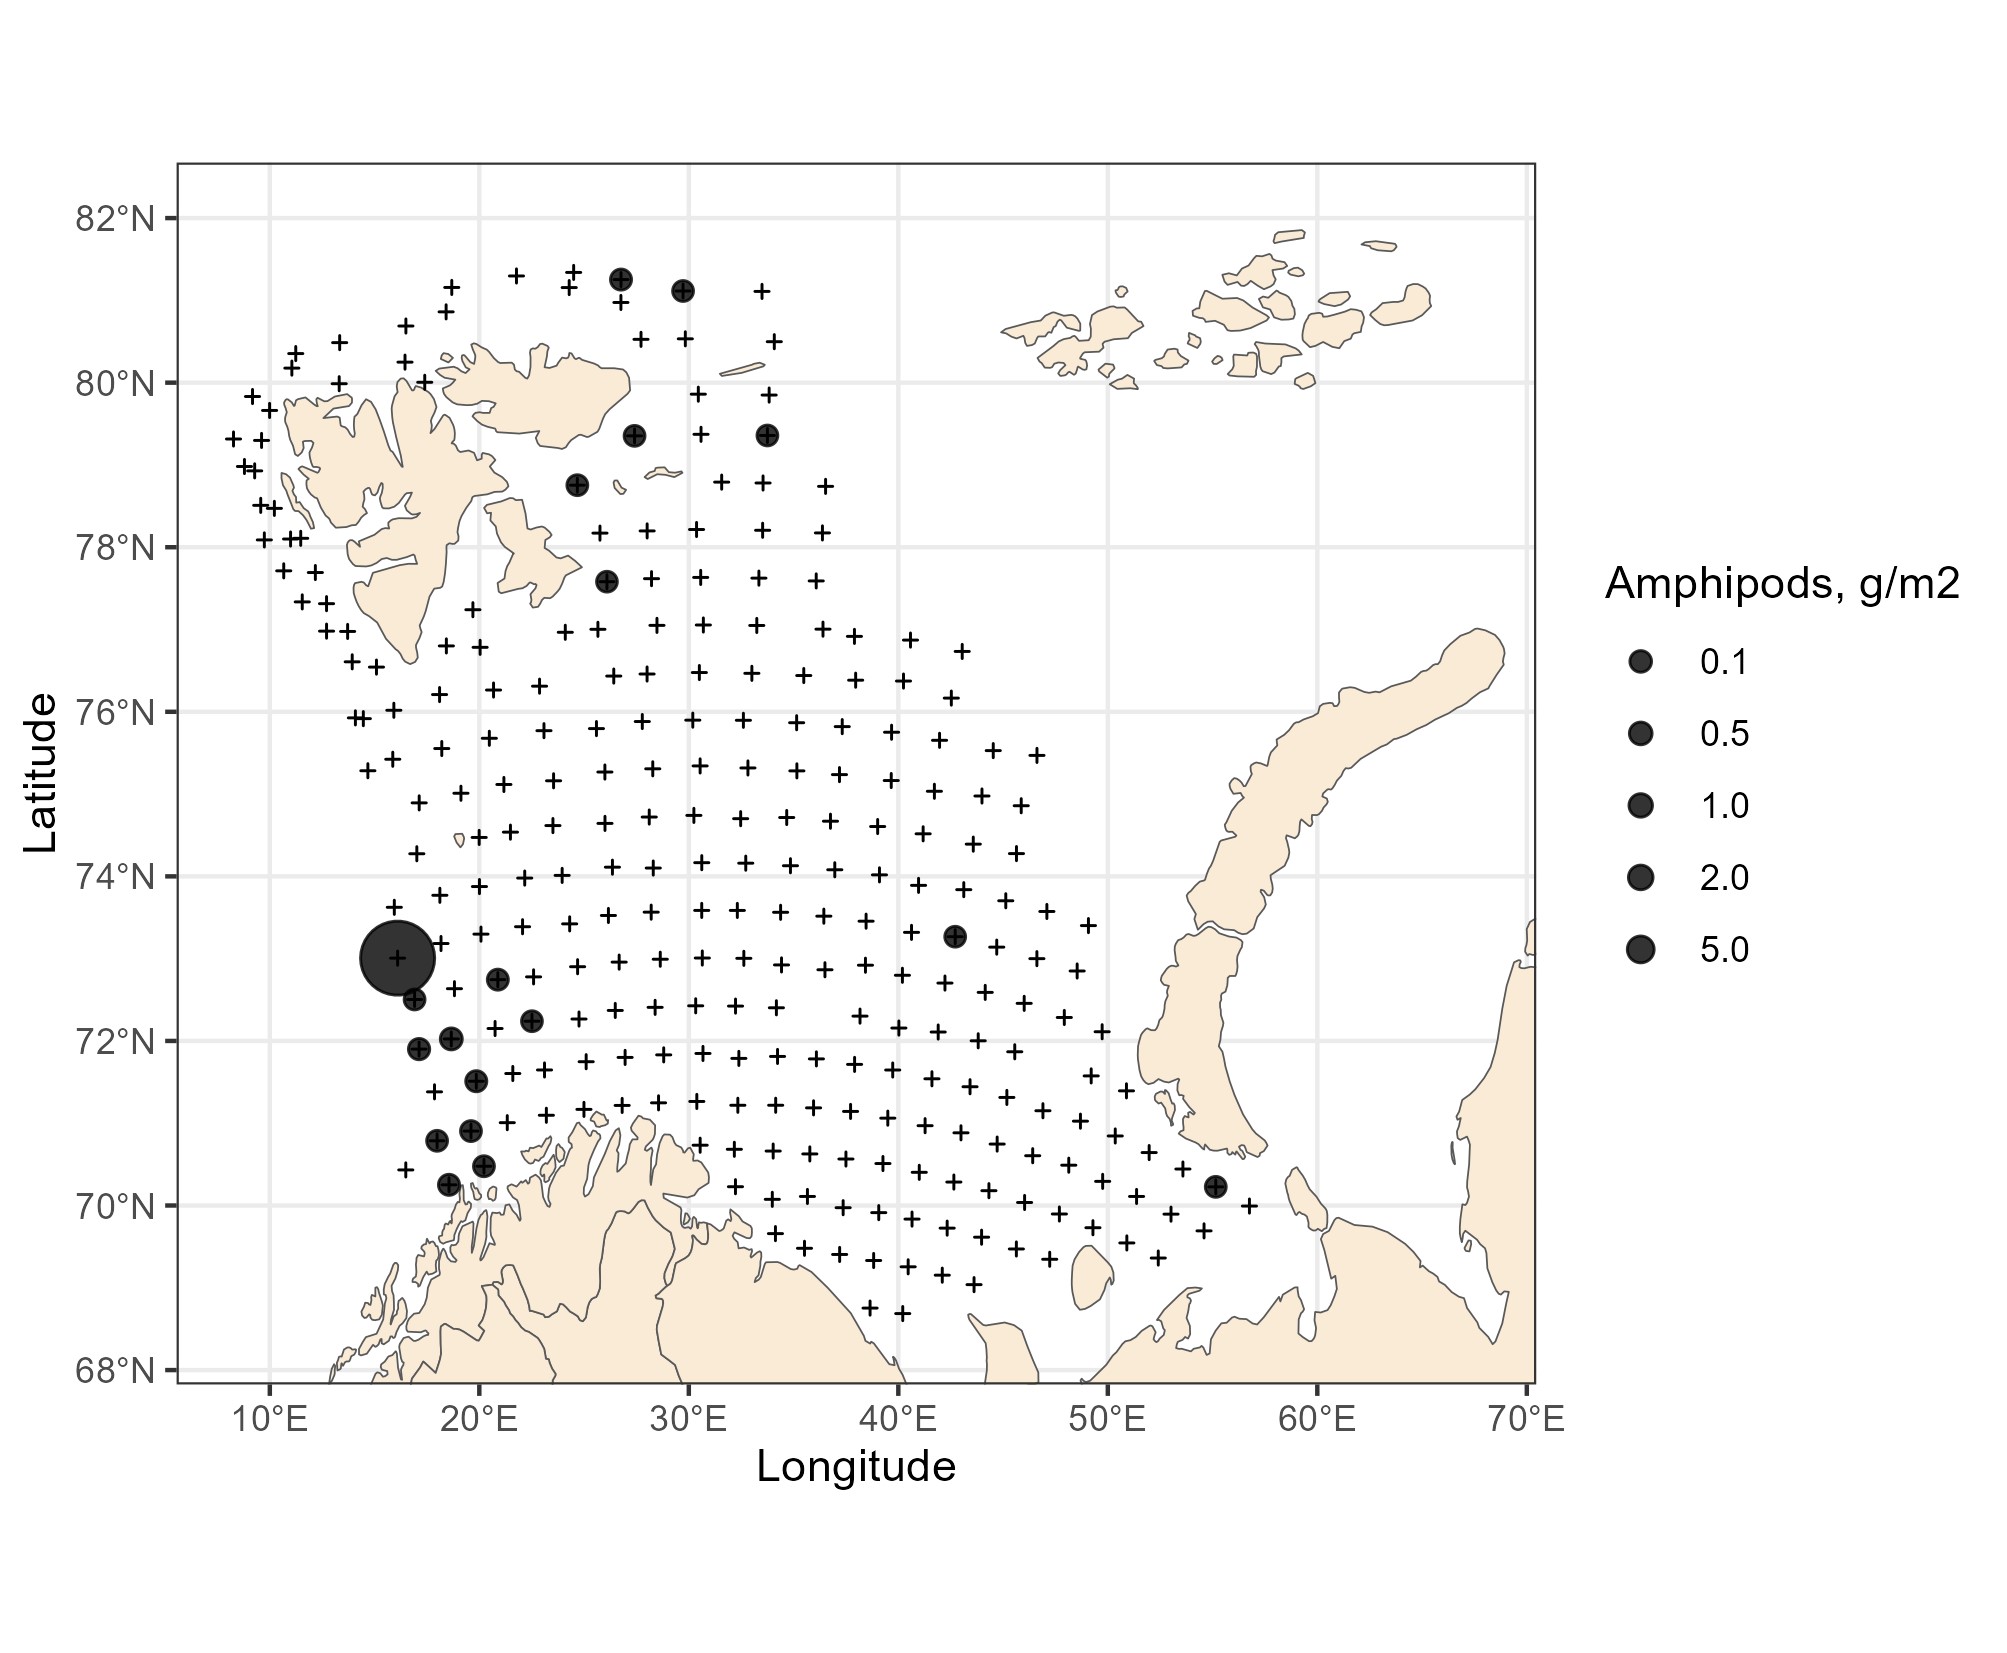 Figure 5.3.2.1. Amphipods distribution, based on trawl stations covering the upper water layers (0-60 m), in the Barents Sea in August-October 2023.